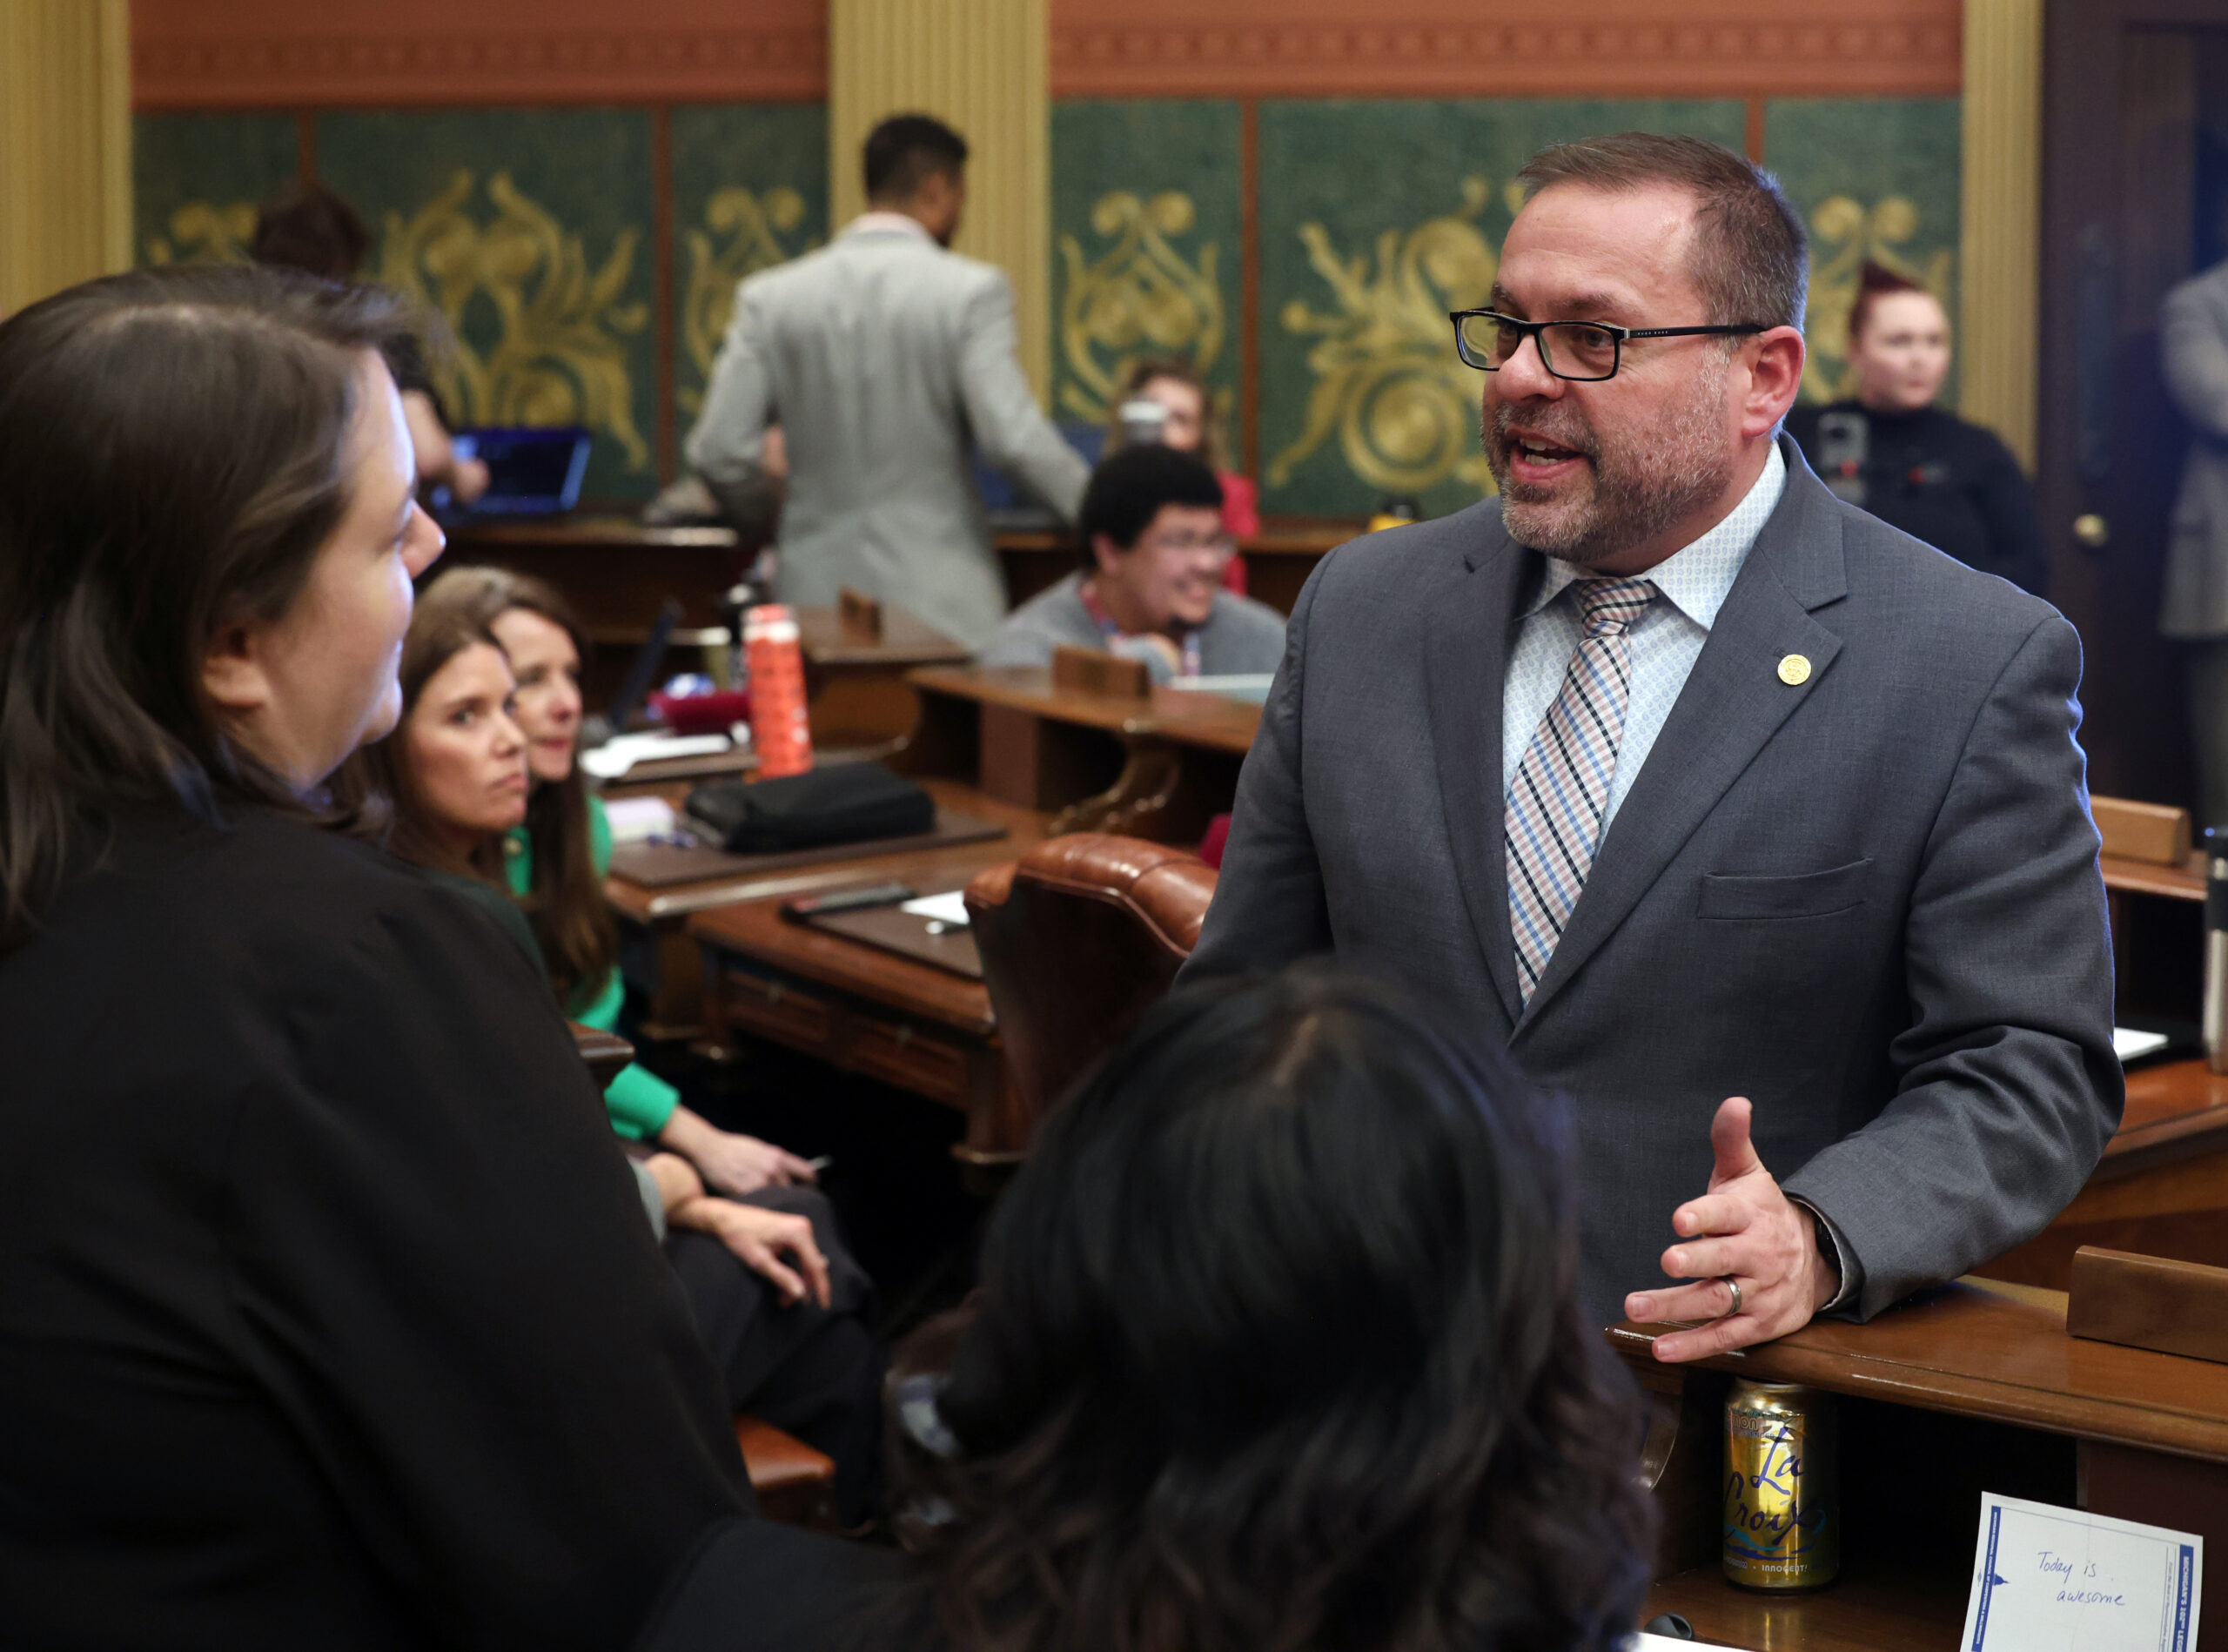 Rep. McFall speaks with colleagues on the Michigan House of Representatives floor.